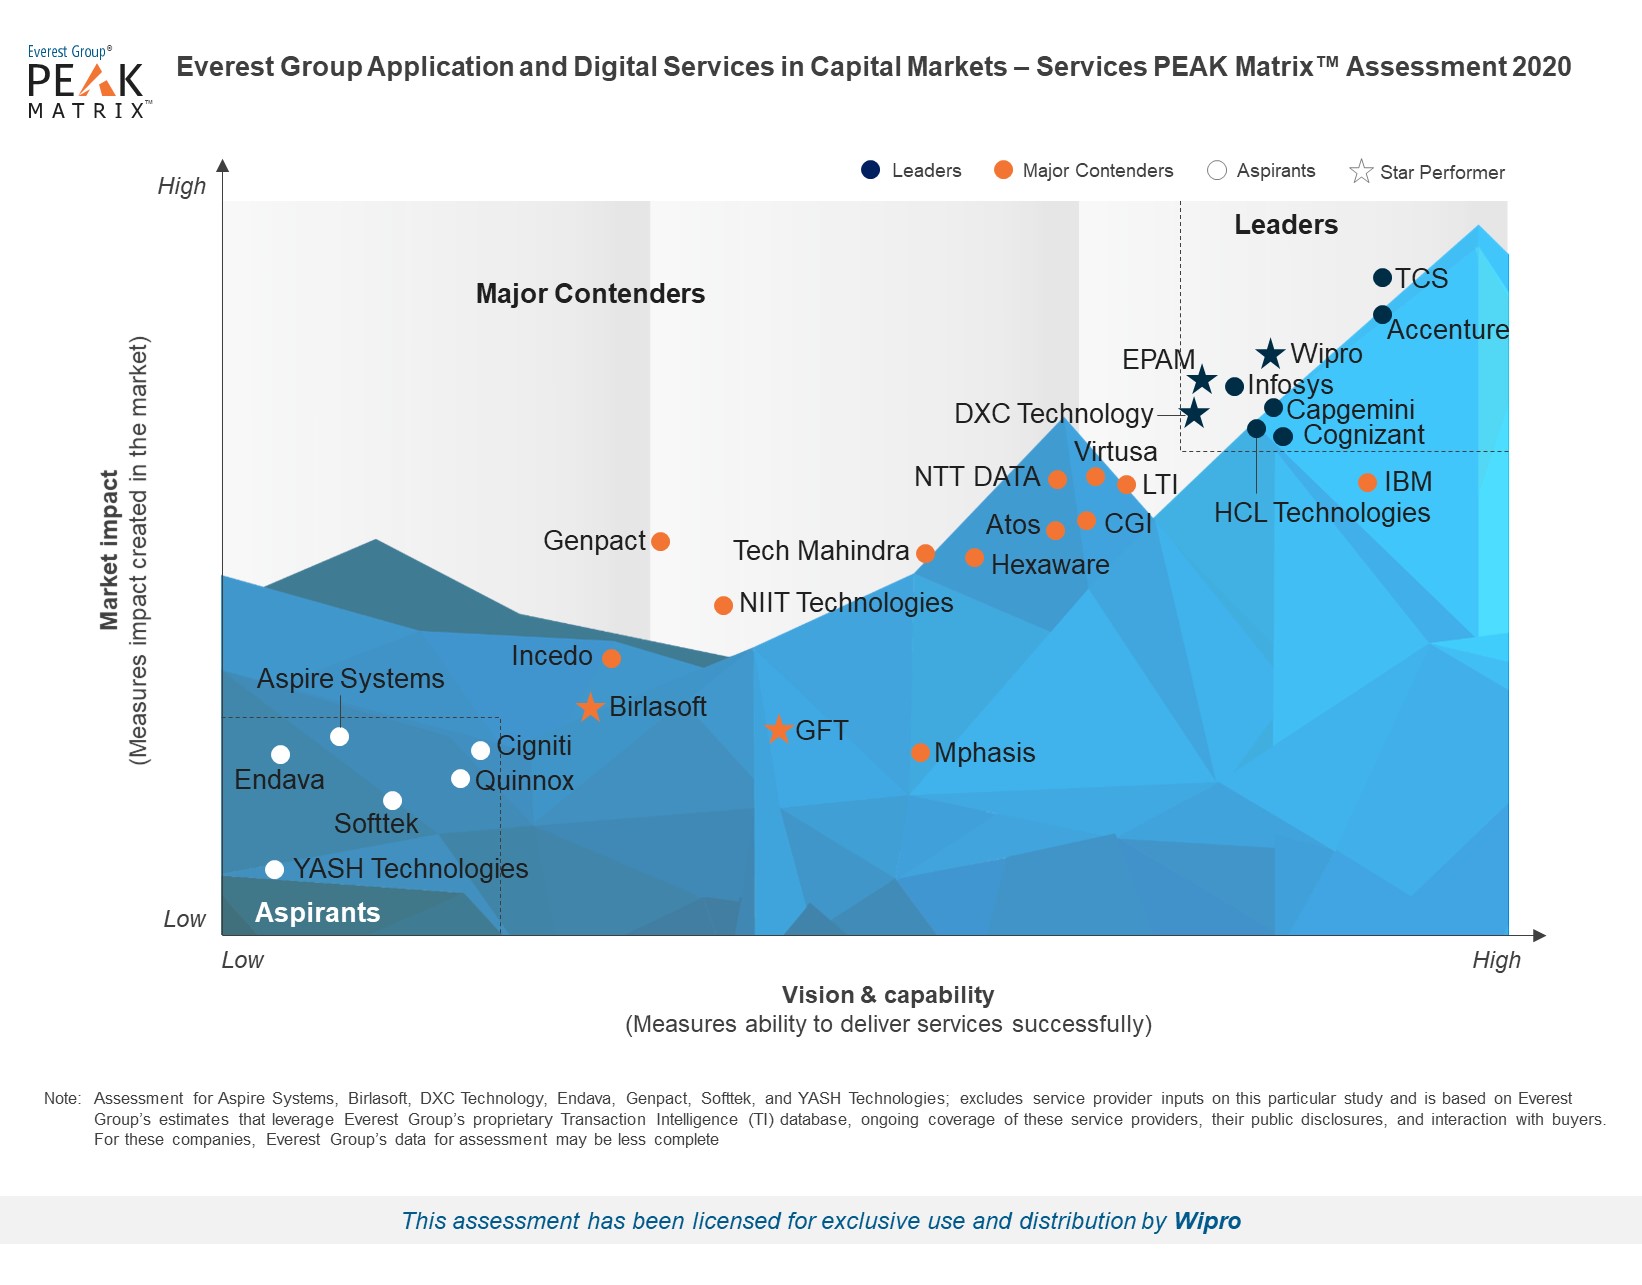 Wipro positioned as a Leader and Star Performer in Application and Digital Services in Capital Markets PEAK Matrix™ 2020